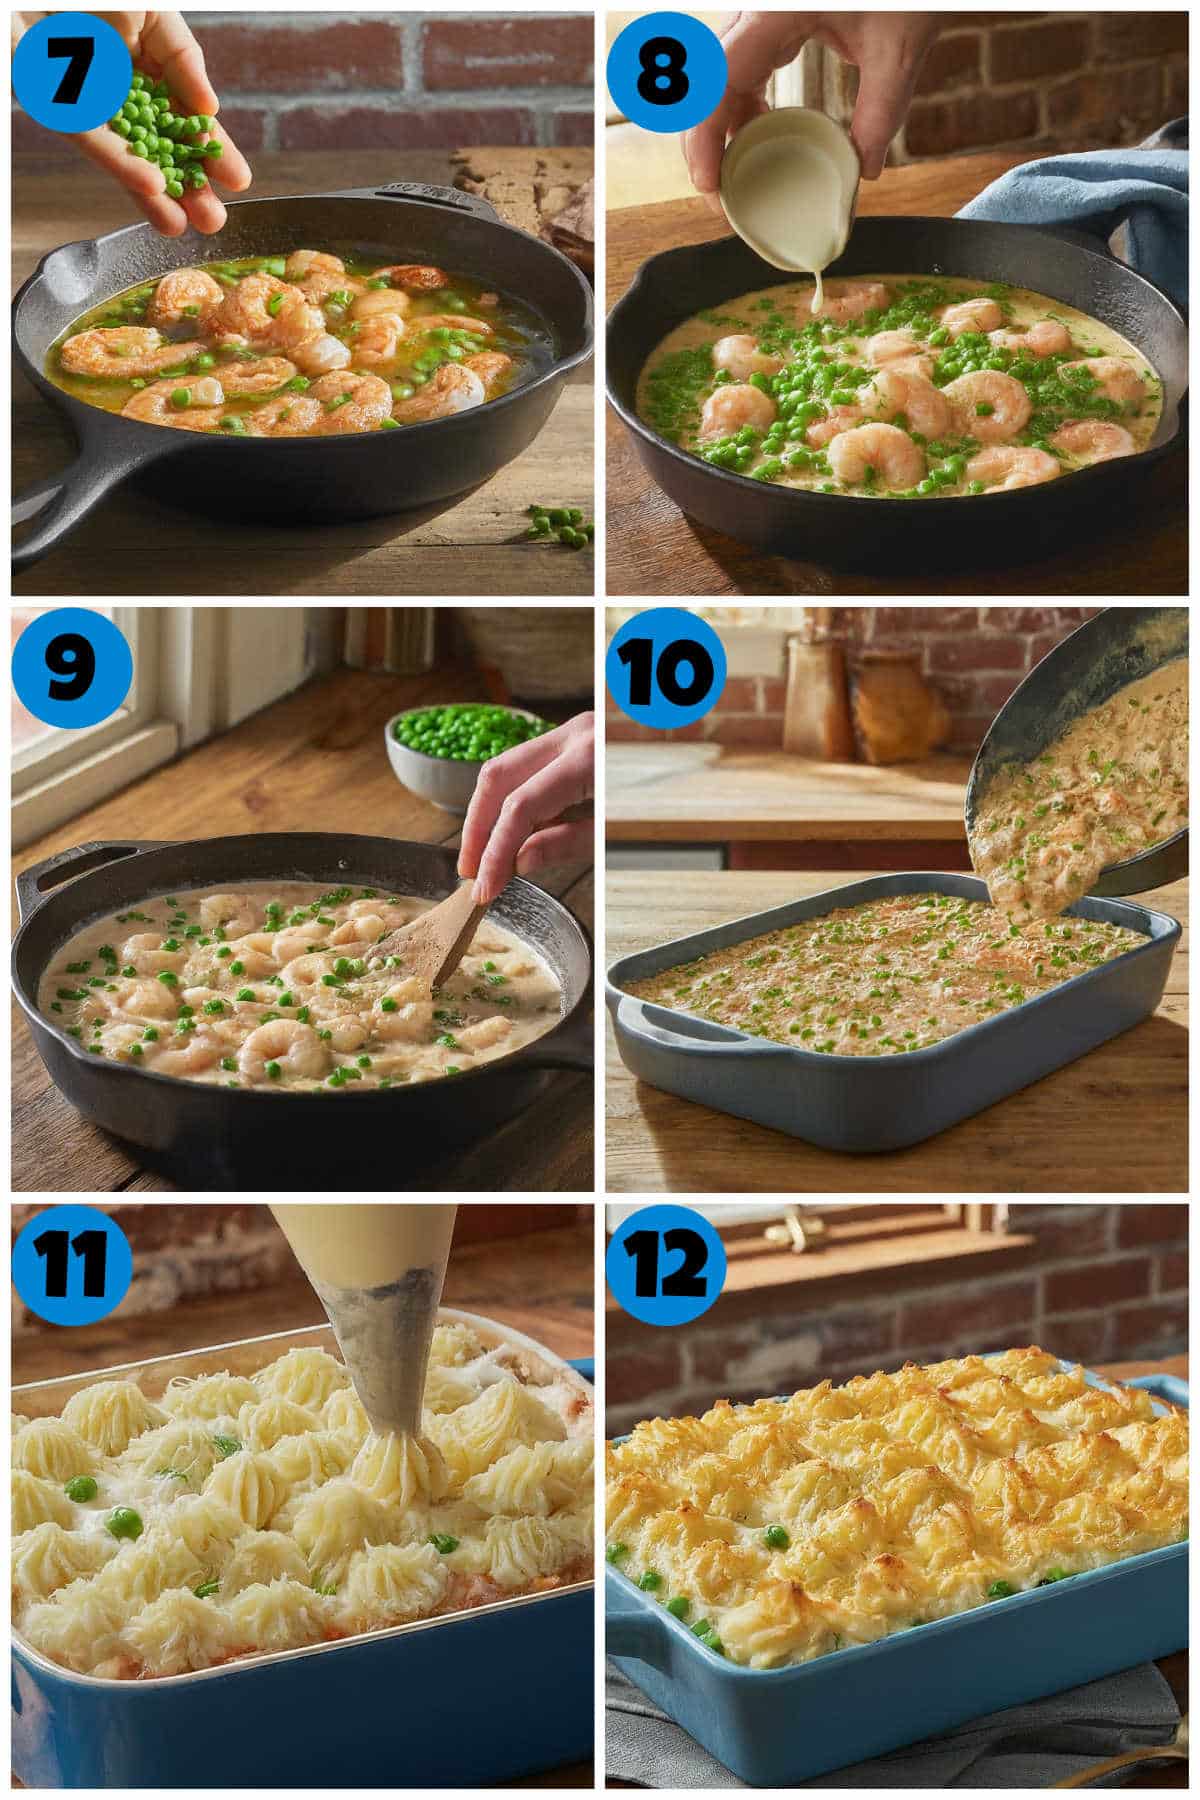 A collage of 6 images showing how to make Fishermans Pie. Recipe Steps 7 through 12.